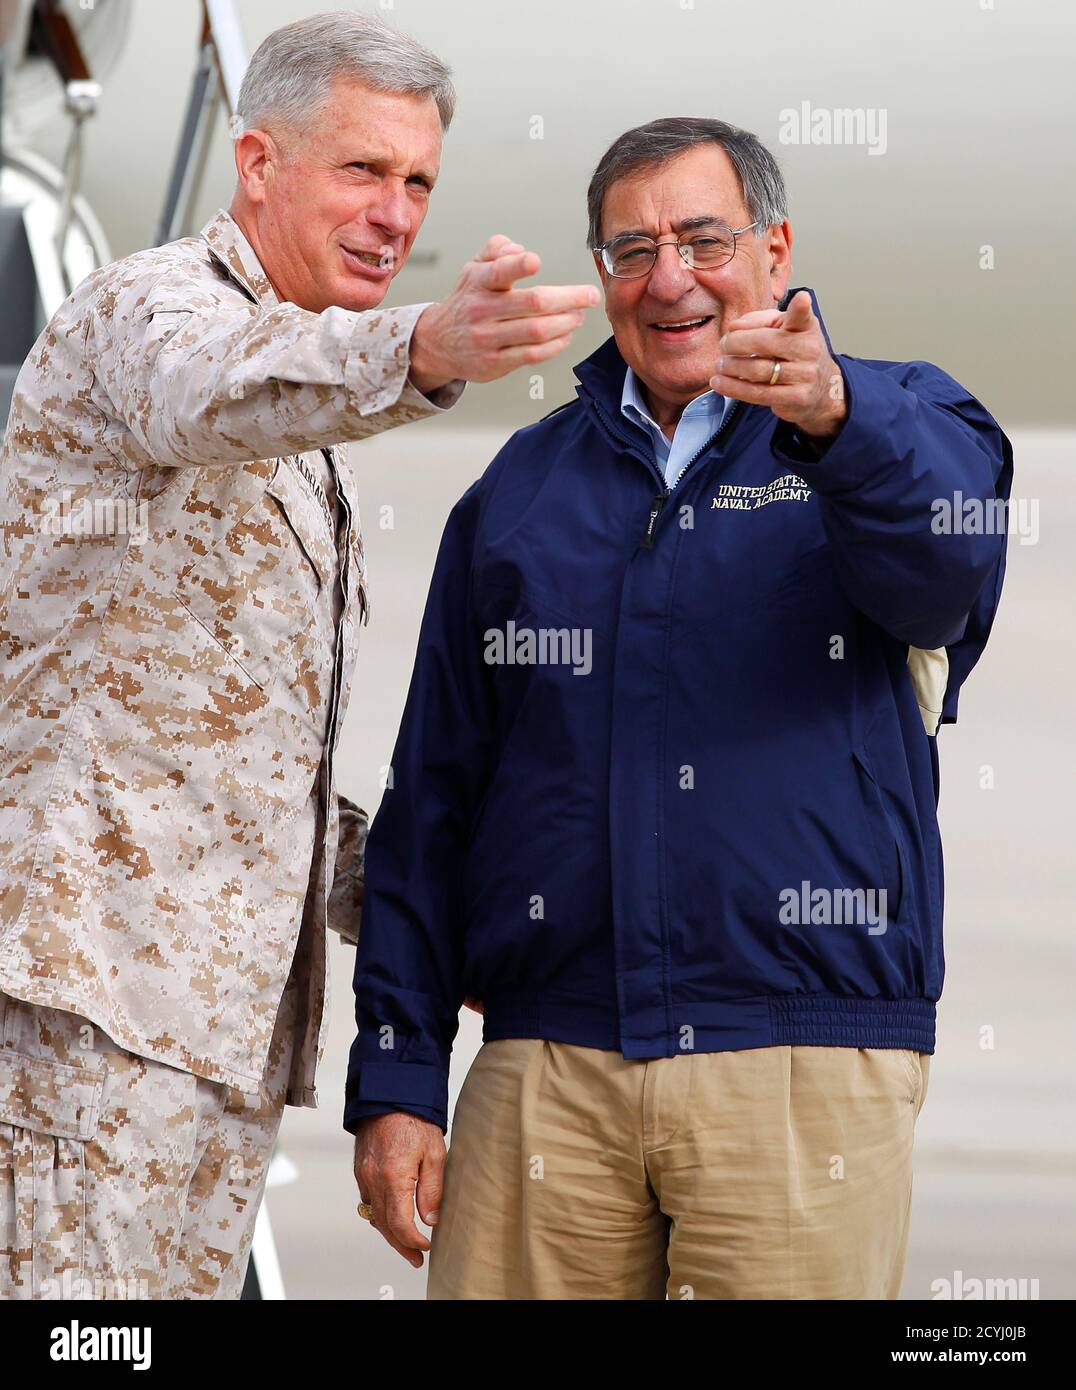 U.S. Secretary of Defense Leon Panetta (R) is greeted by  Lt. General Thomas Waldhauser of 1st Marine Expeditionary Force upon his arrival at Camp Pendleton March 30, 2012.   REUTERS/ Mike Blake    (UNITED STATES - Tags: MILITARY POLITICS) Stock Photo